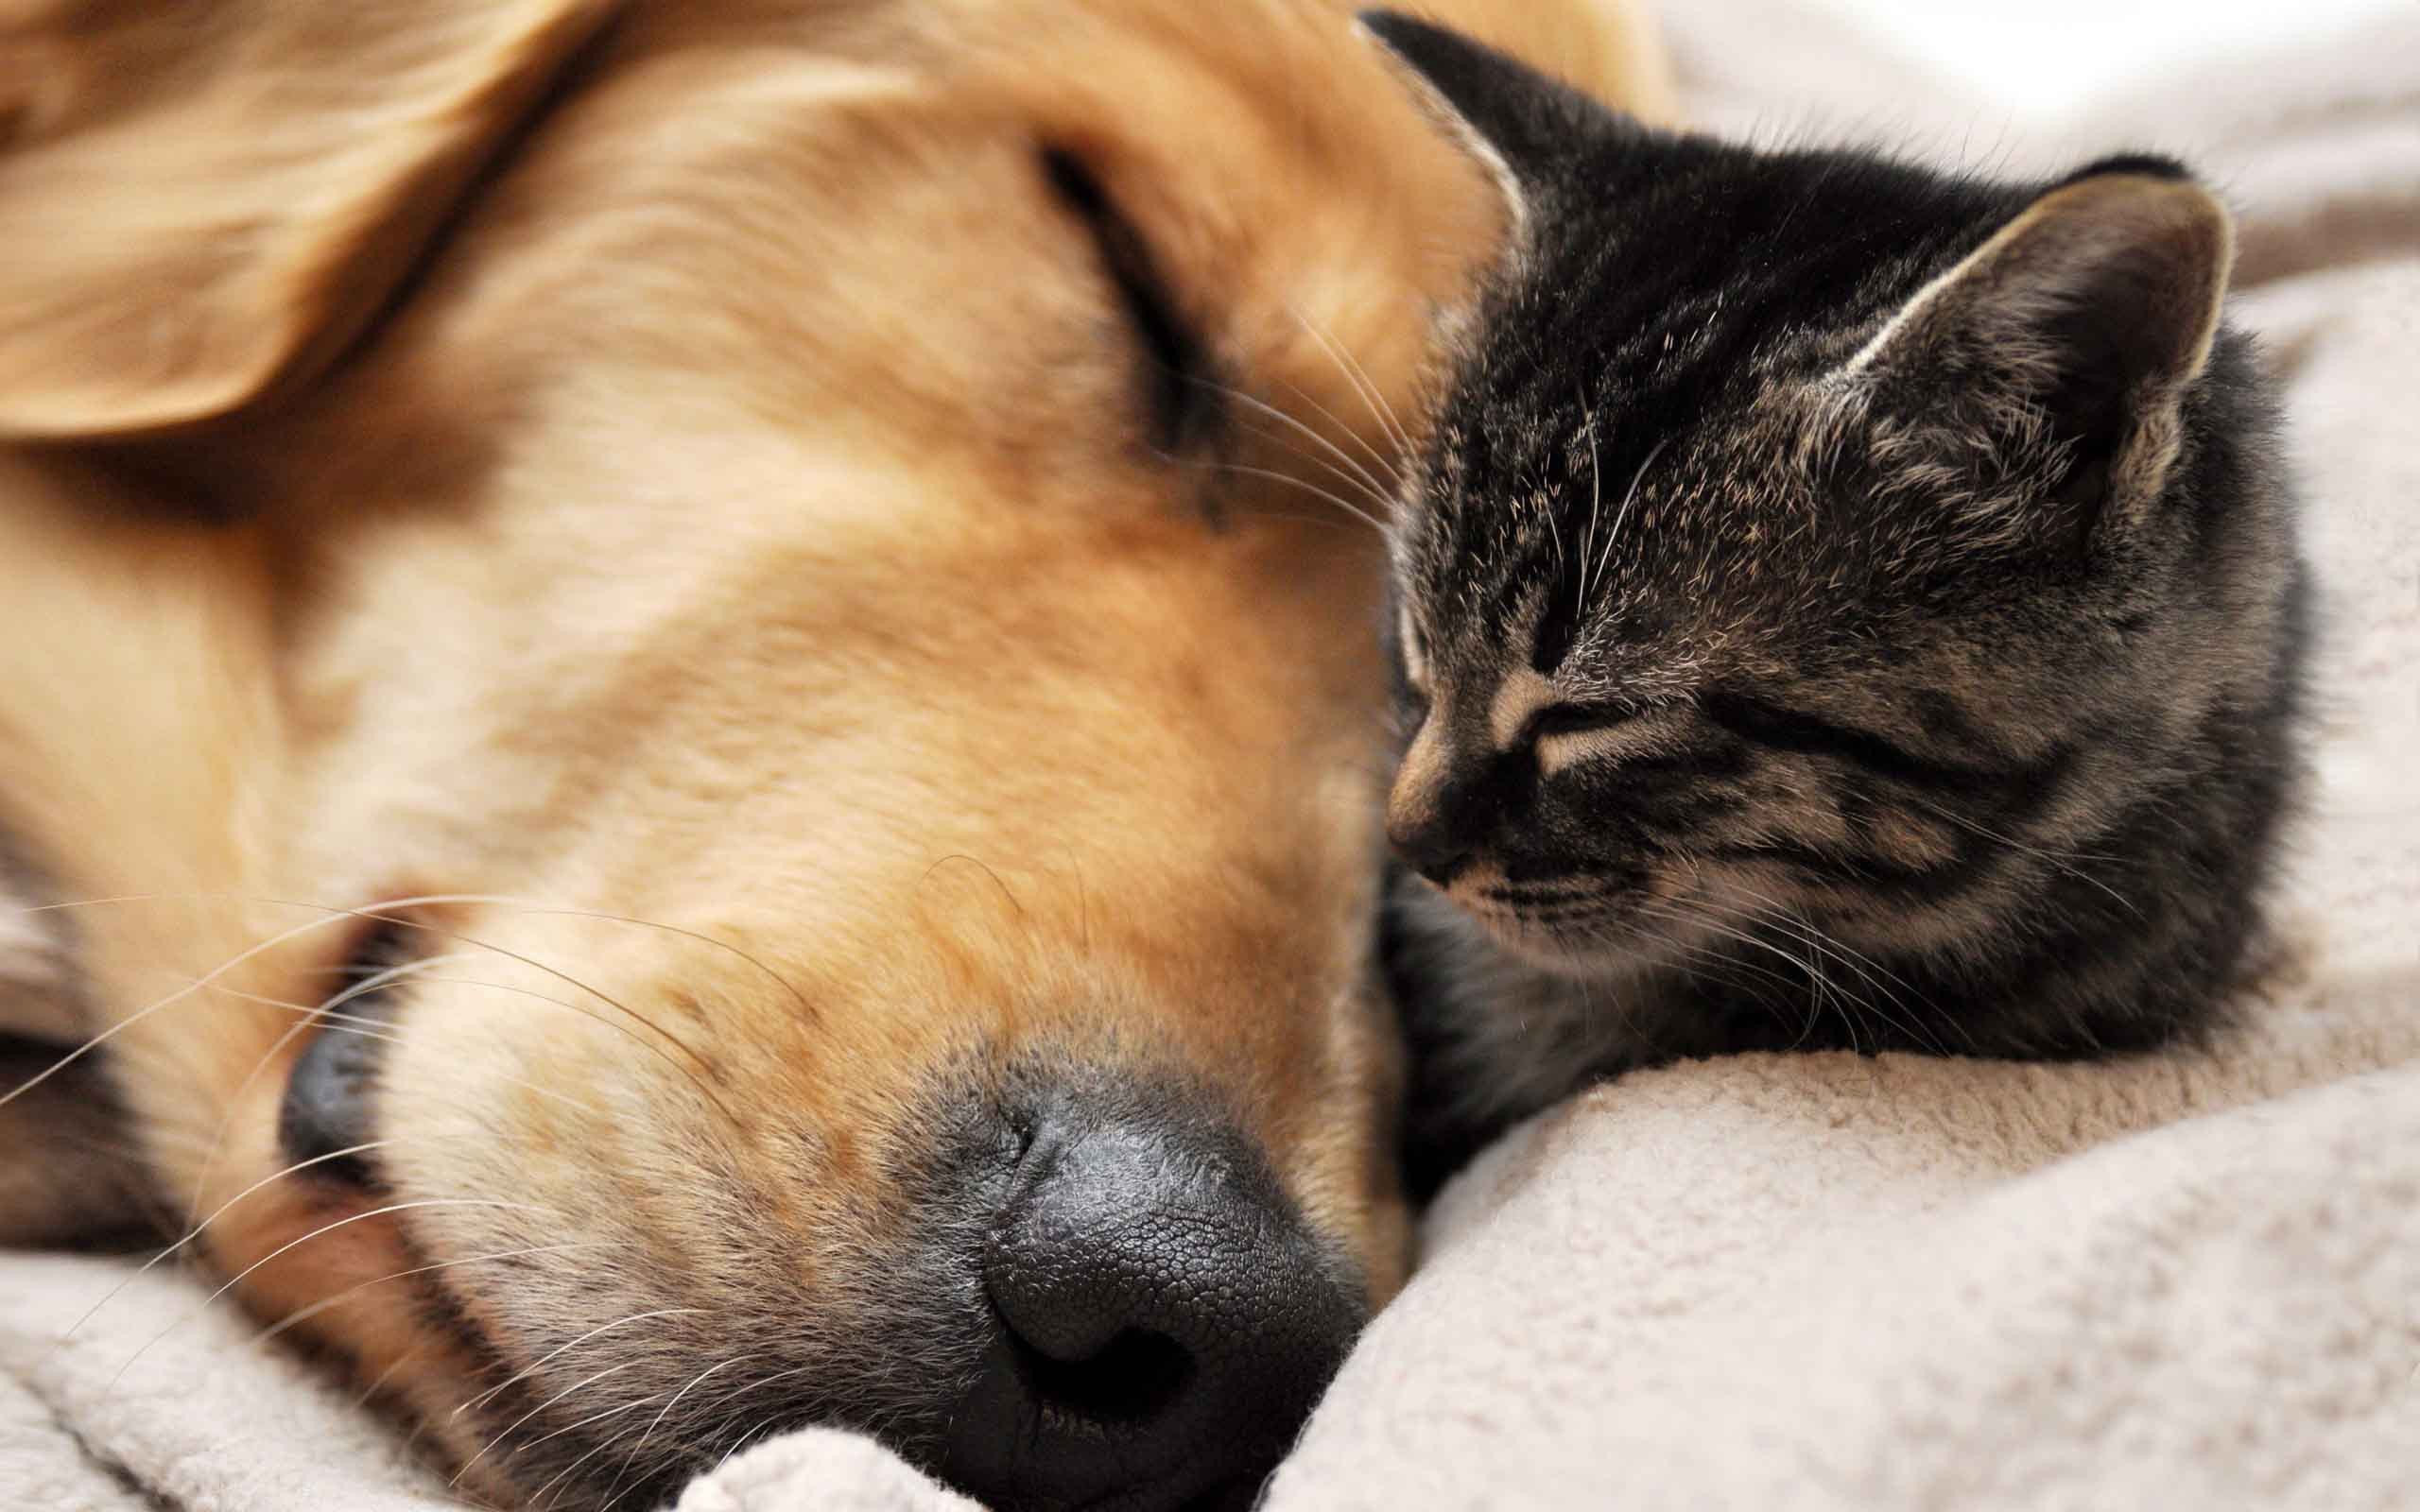 2560x1600 Cat and dog sleeping wallpapers and images - wallpapers, pictures .